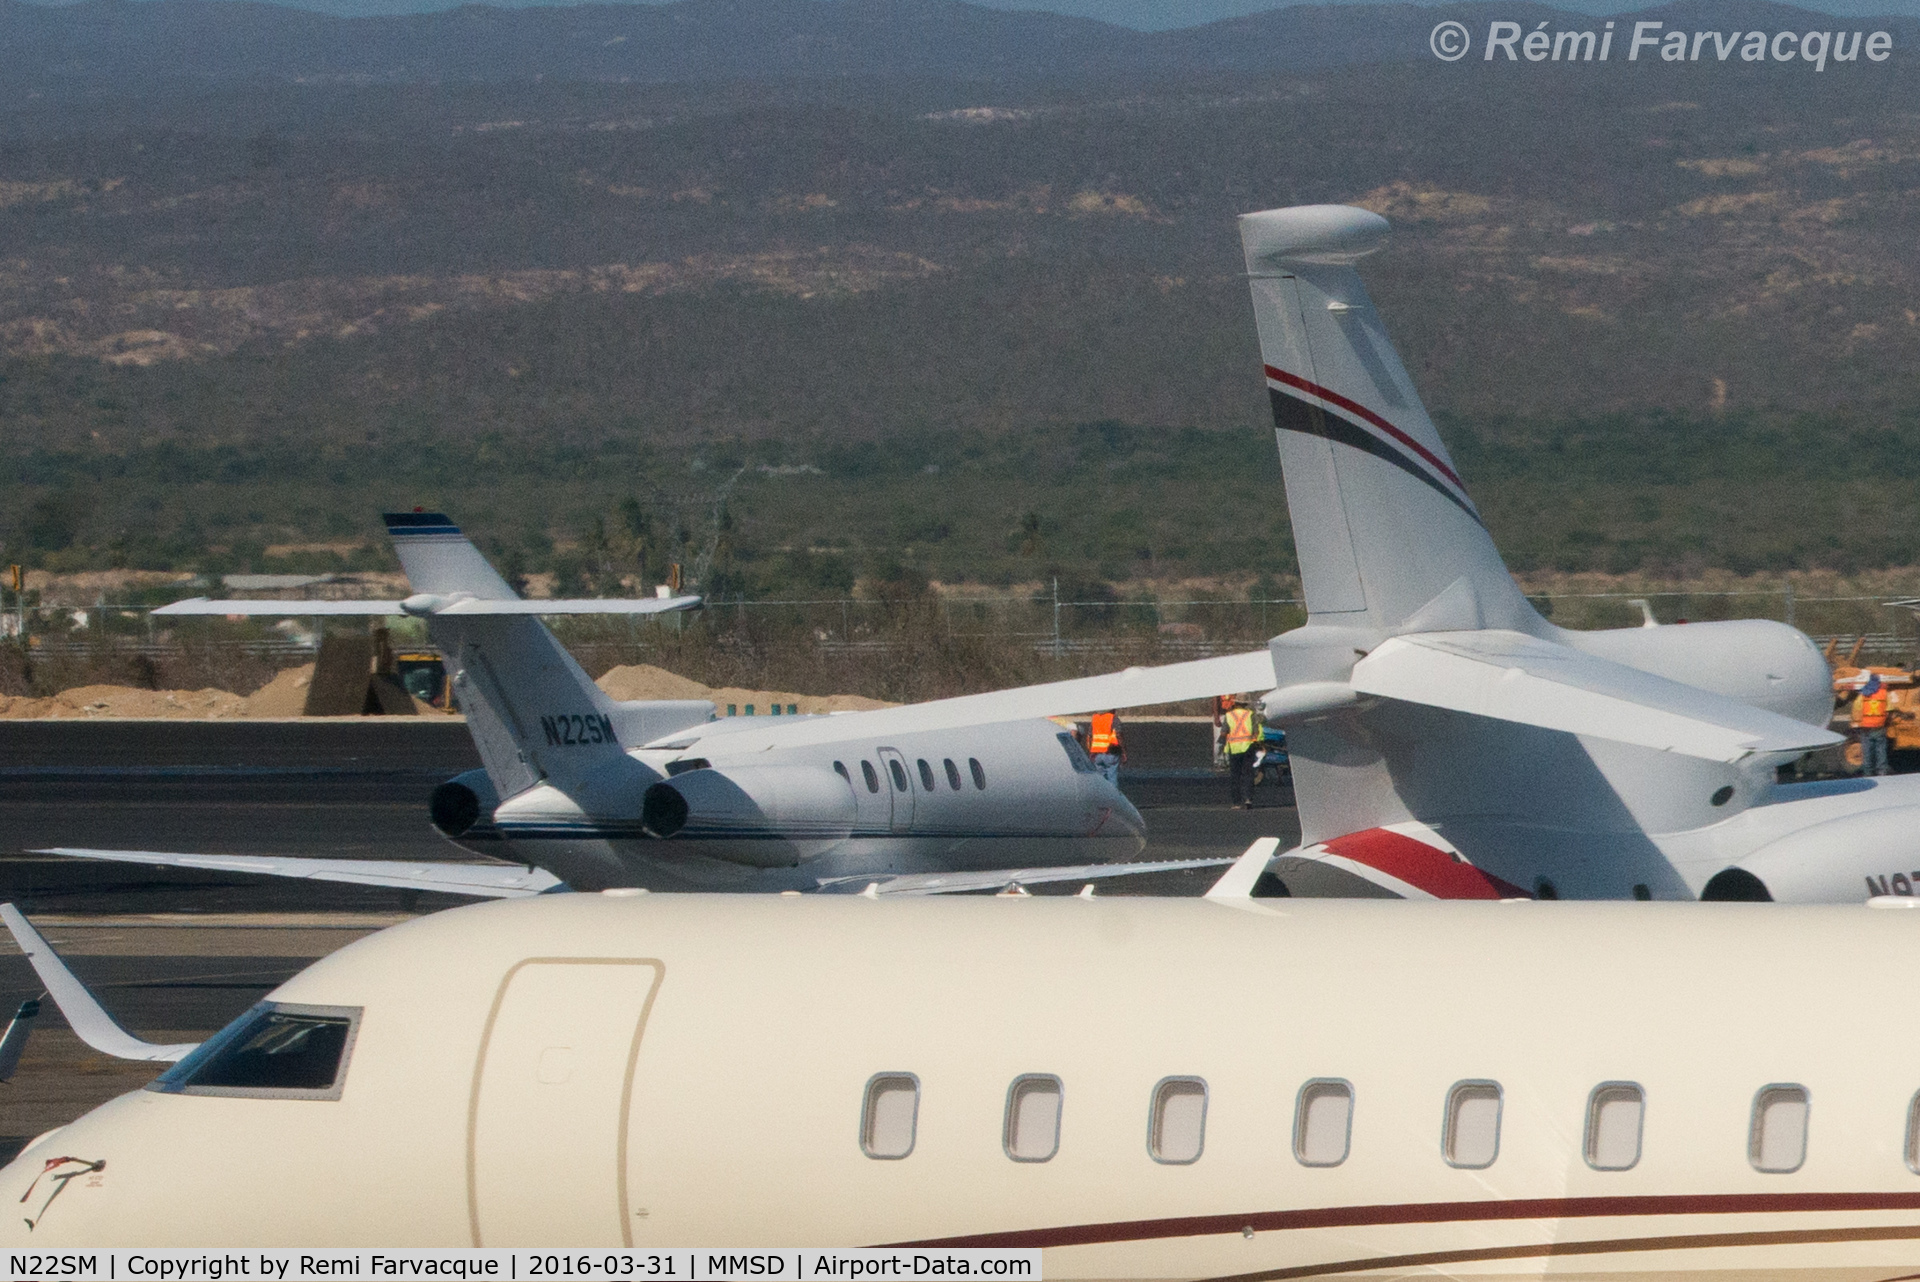 N22SM, 2004 Raytheon Hawker 800XP C/N 258655, Parked in executive jet area.